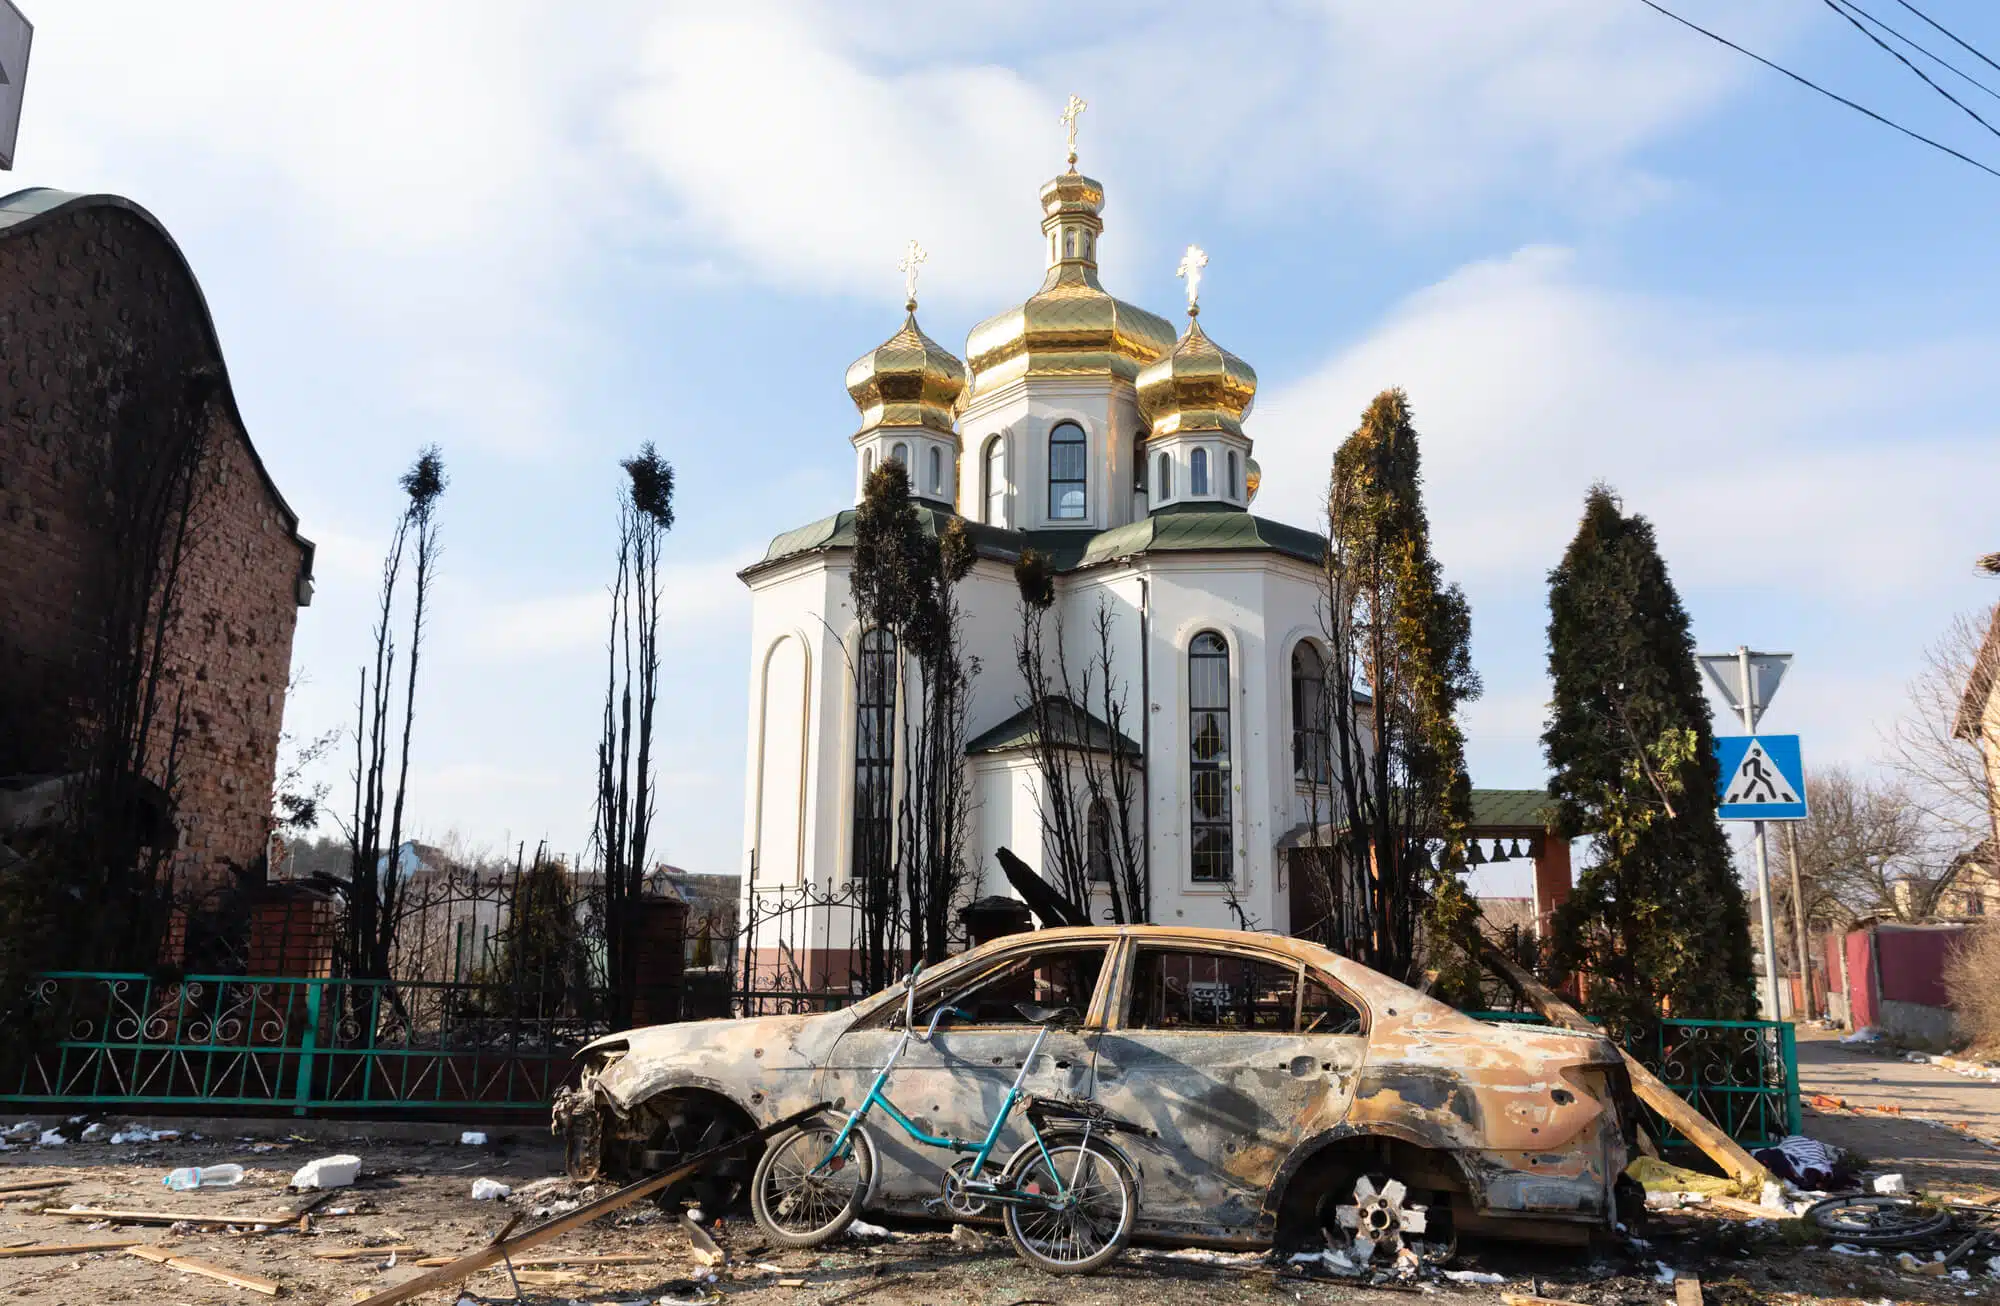 Irpin, a suburb of Kyiv, the capital of Ukraine, on March 9, 2022 after being shelled by Russian military forces